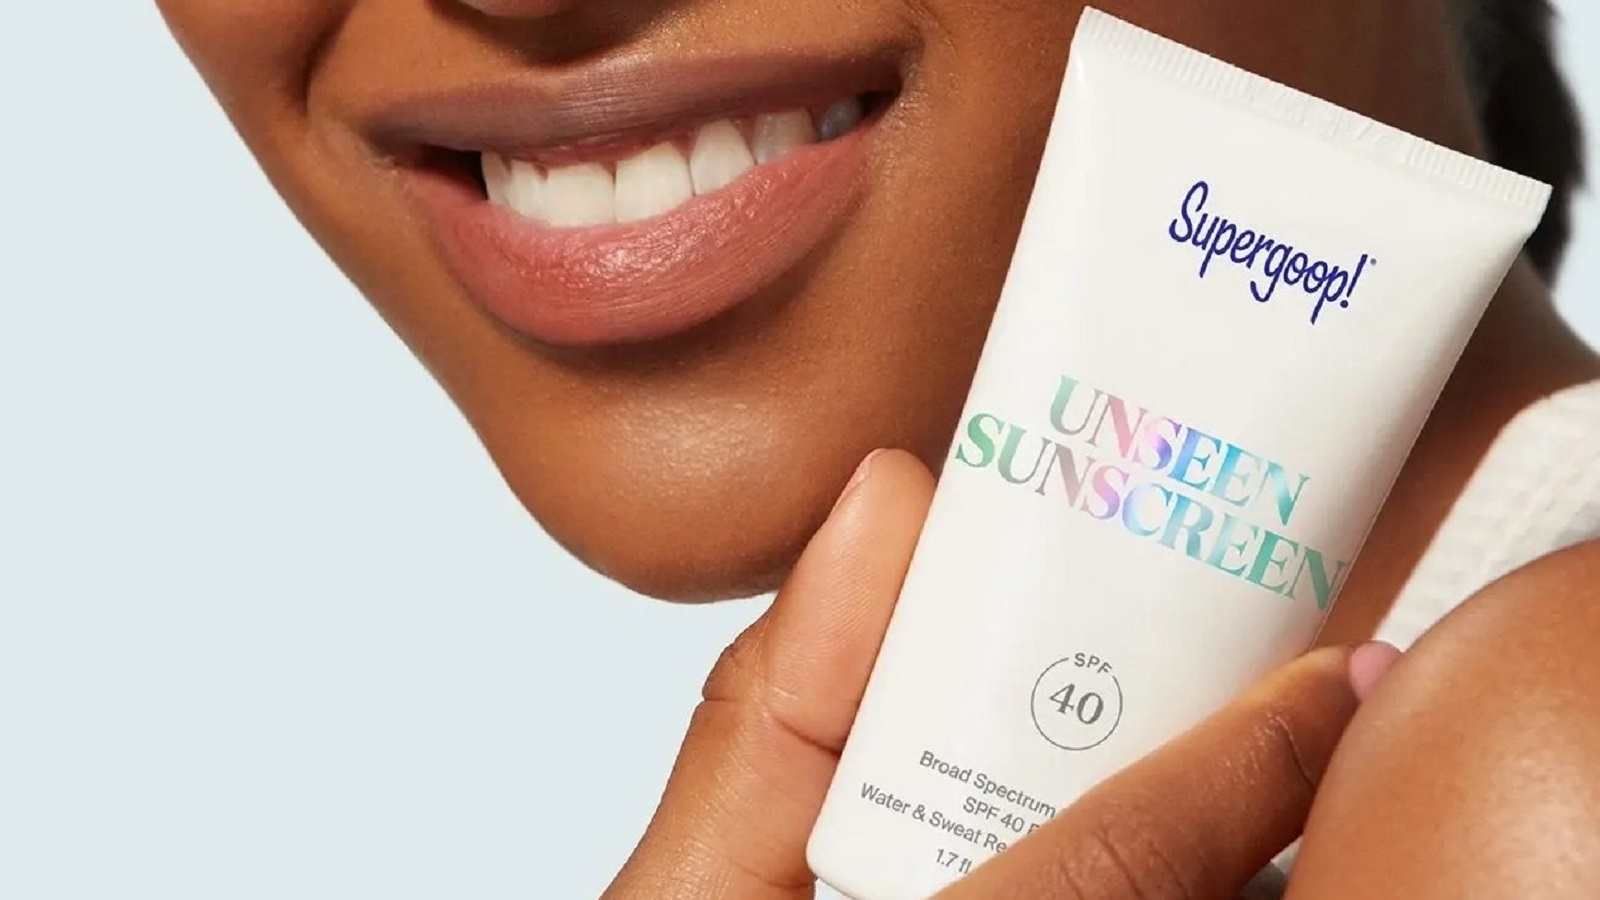 Supergoop! Sunscreen Review: Does It Really Work?